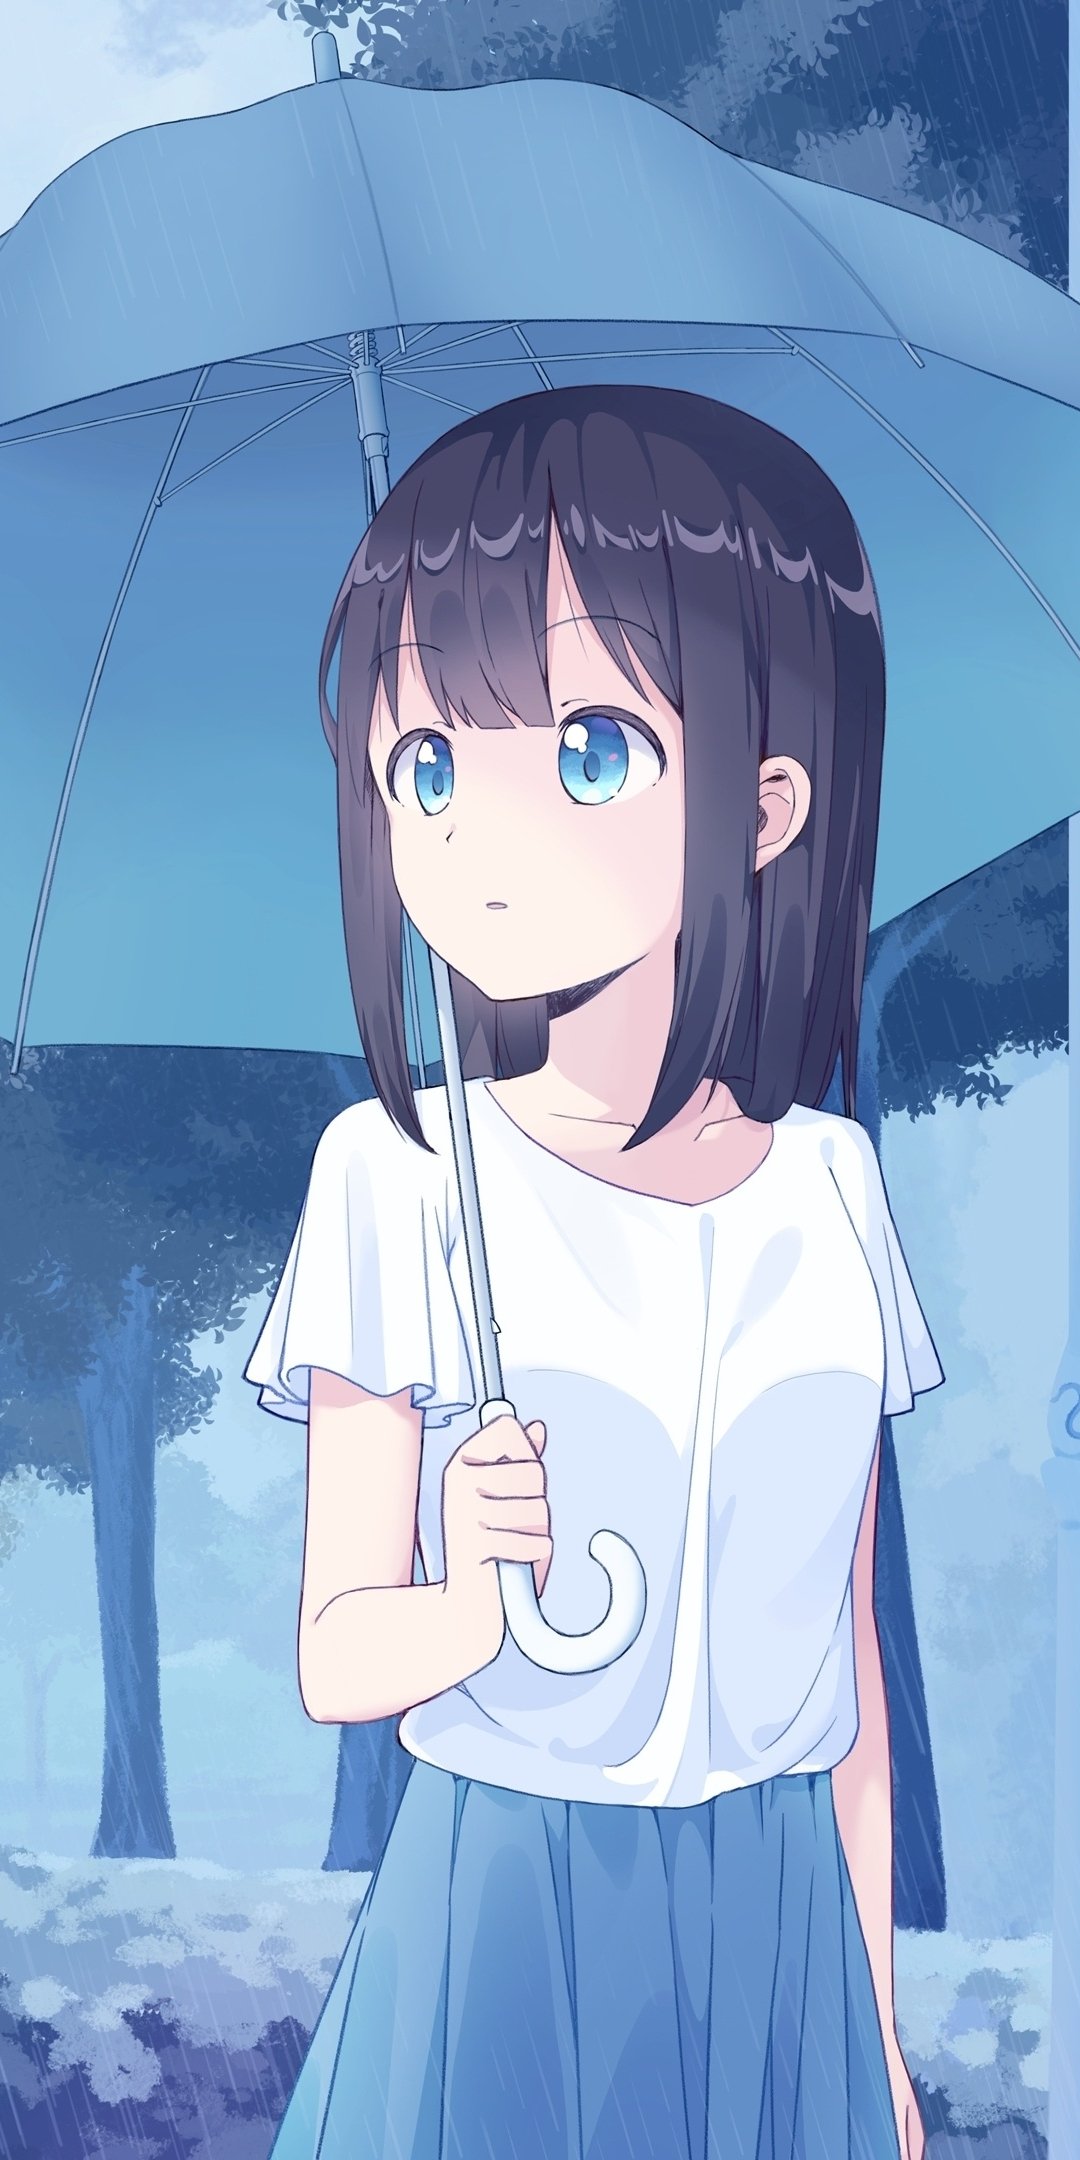 Download anime girl, cute, with umbrella, art 1080x2160 wallpaper, honor 7x, honor 9 lite, honor view 1080x2160 HD image, background, 18103